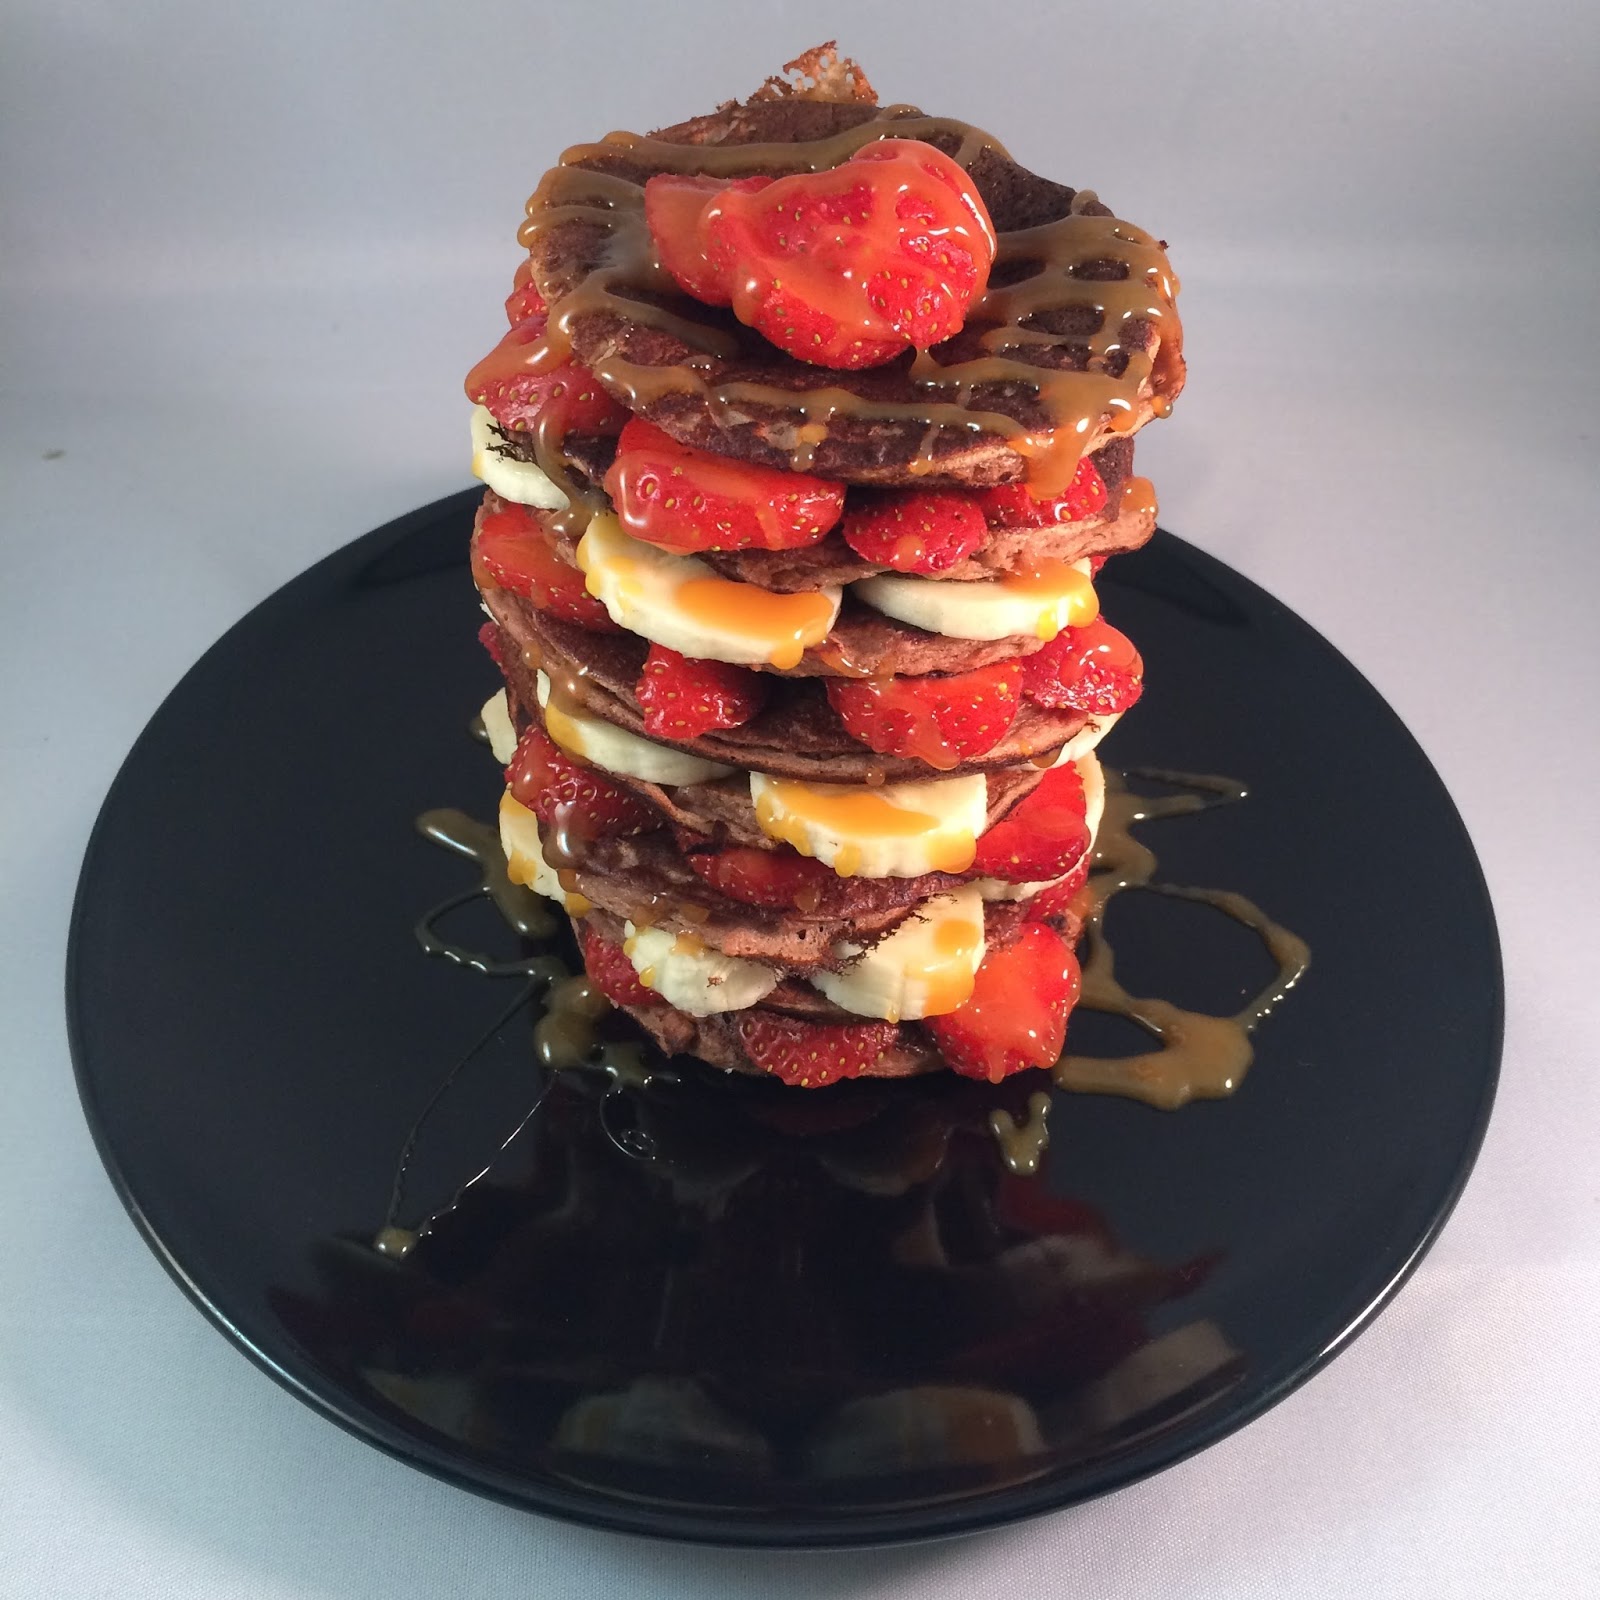 chocolate banana strawberry sci-mx protein pancake stack with toffee sauce recipe